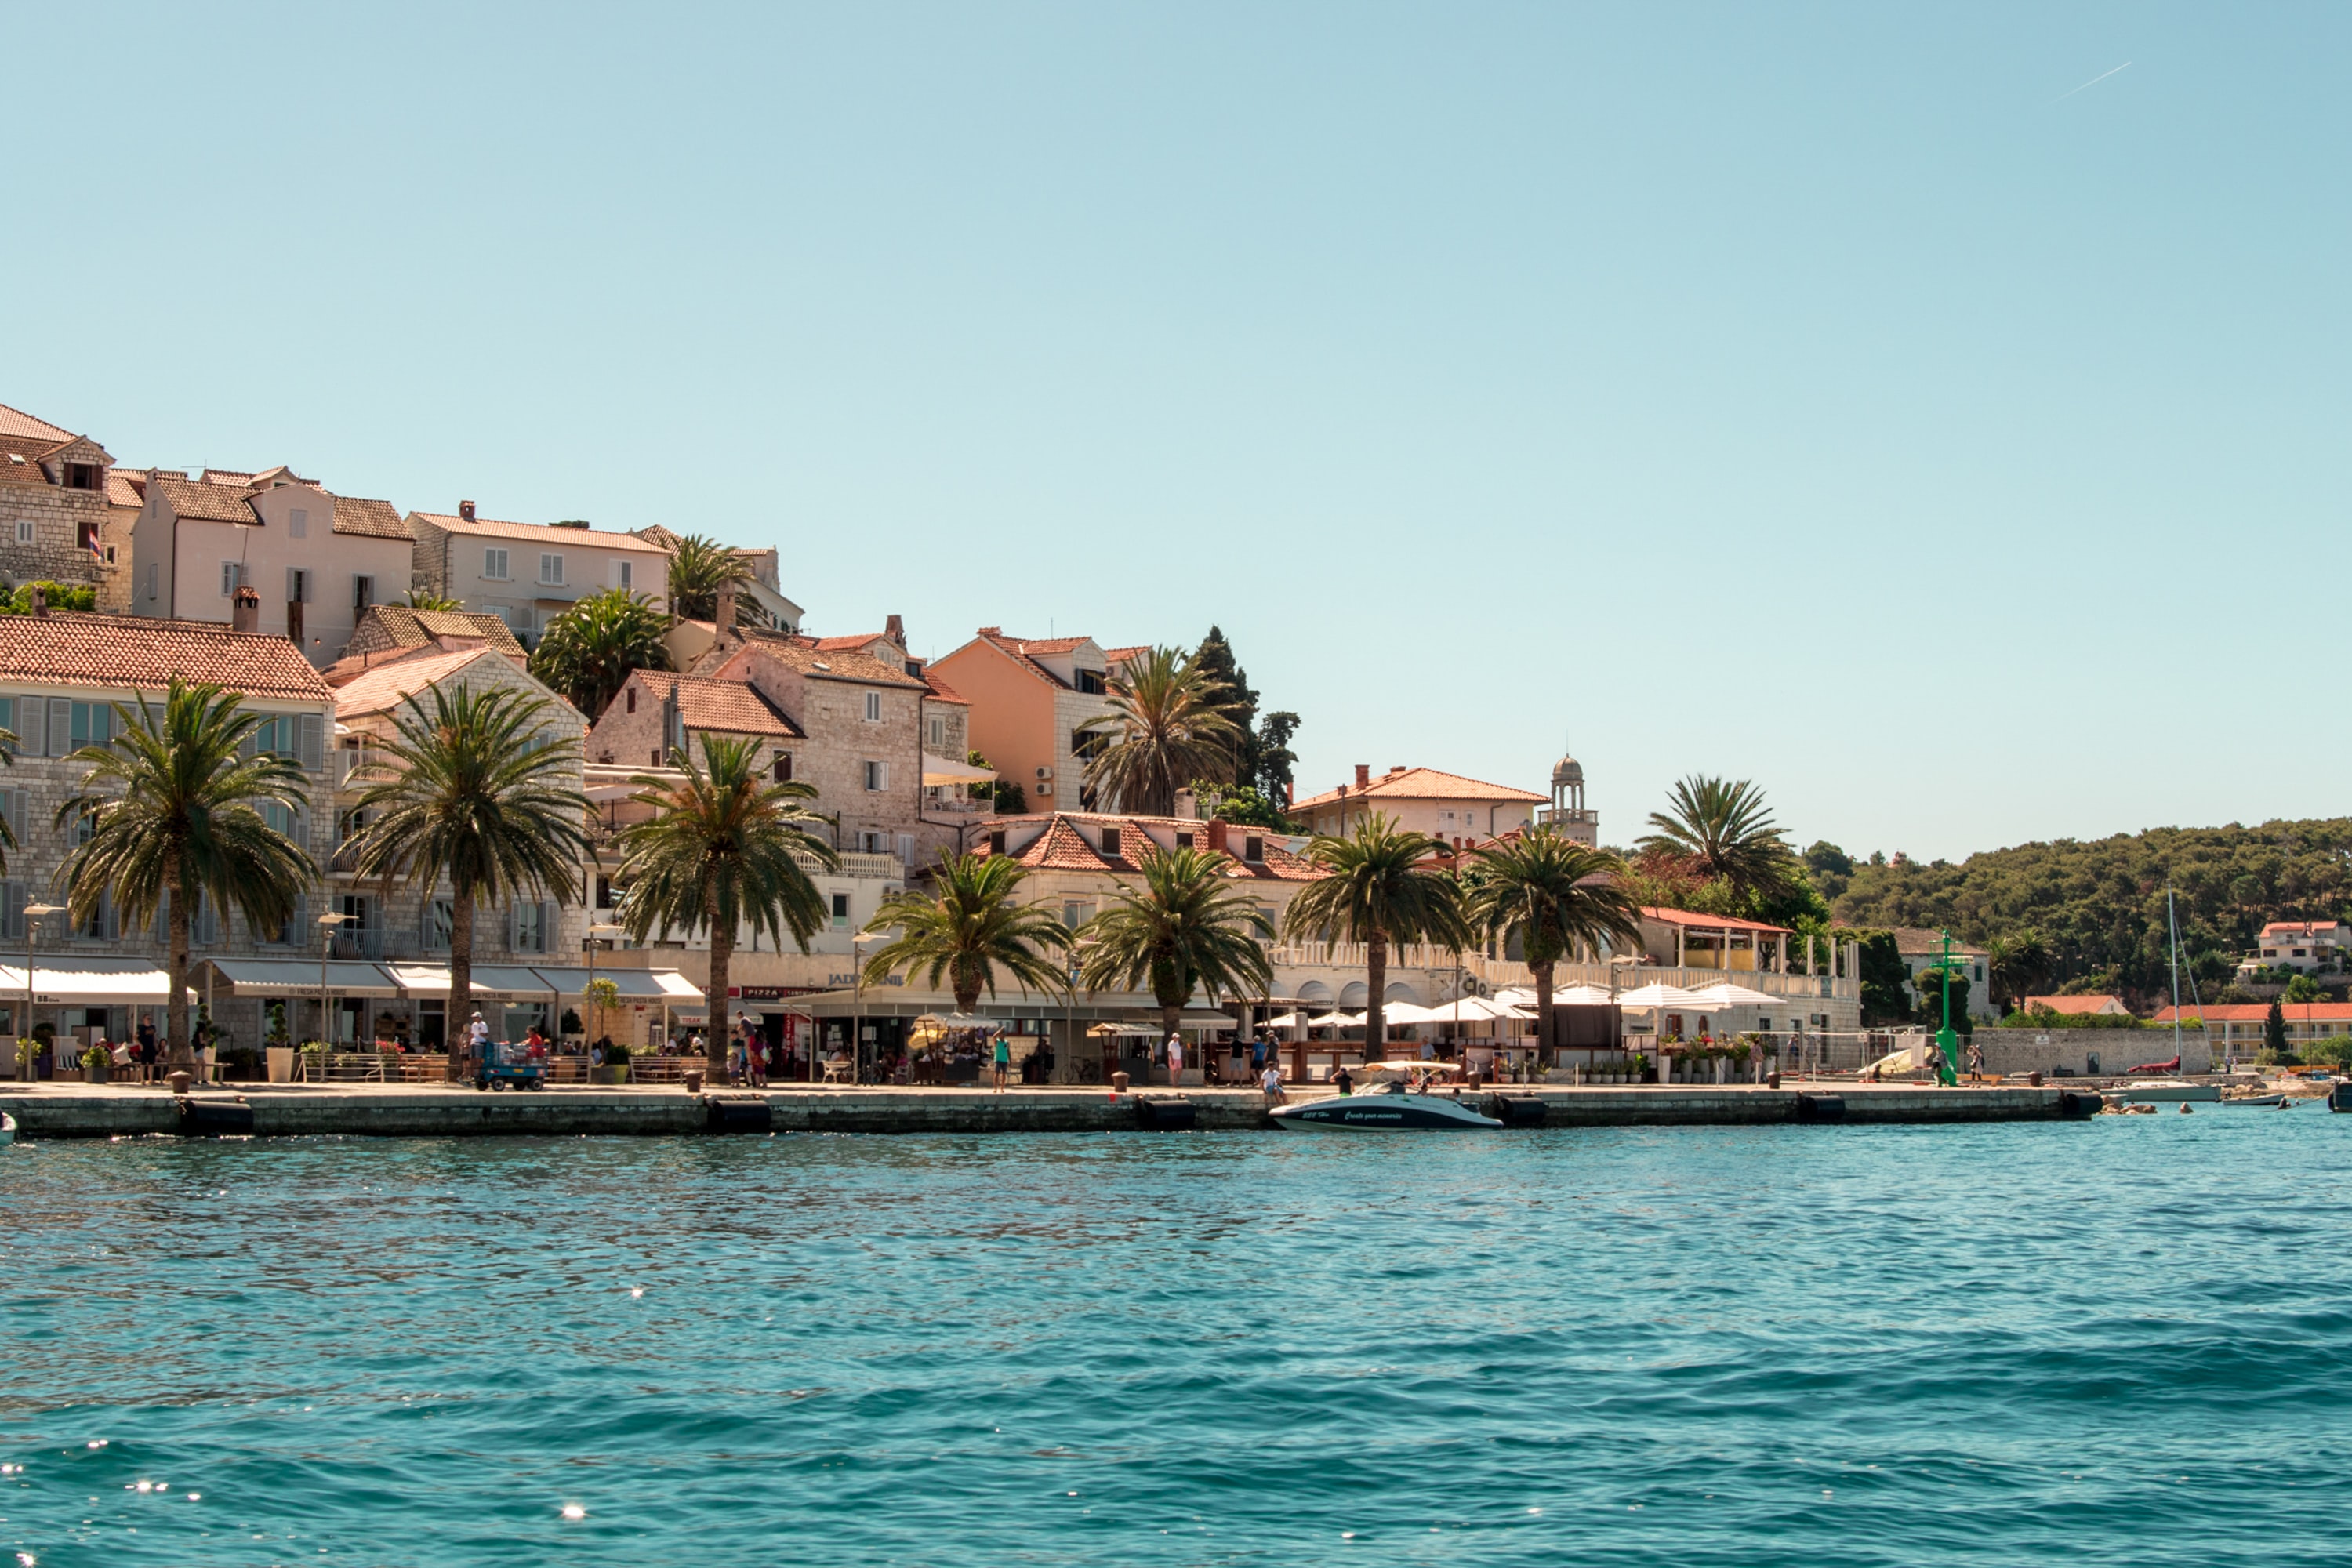 About the Island of Hvar